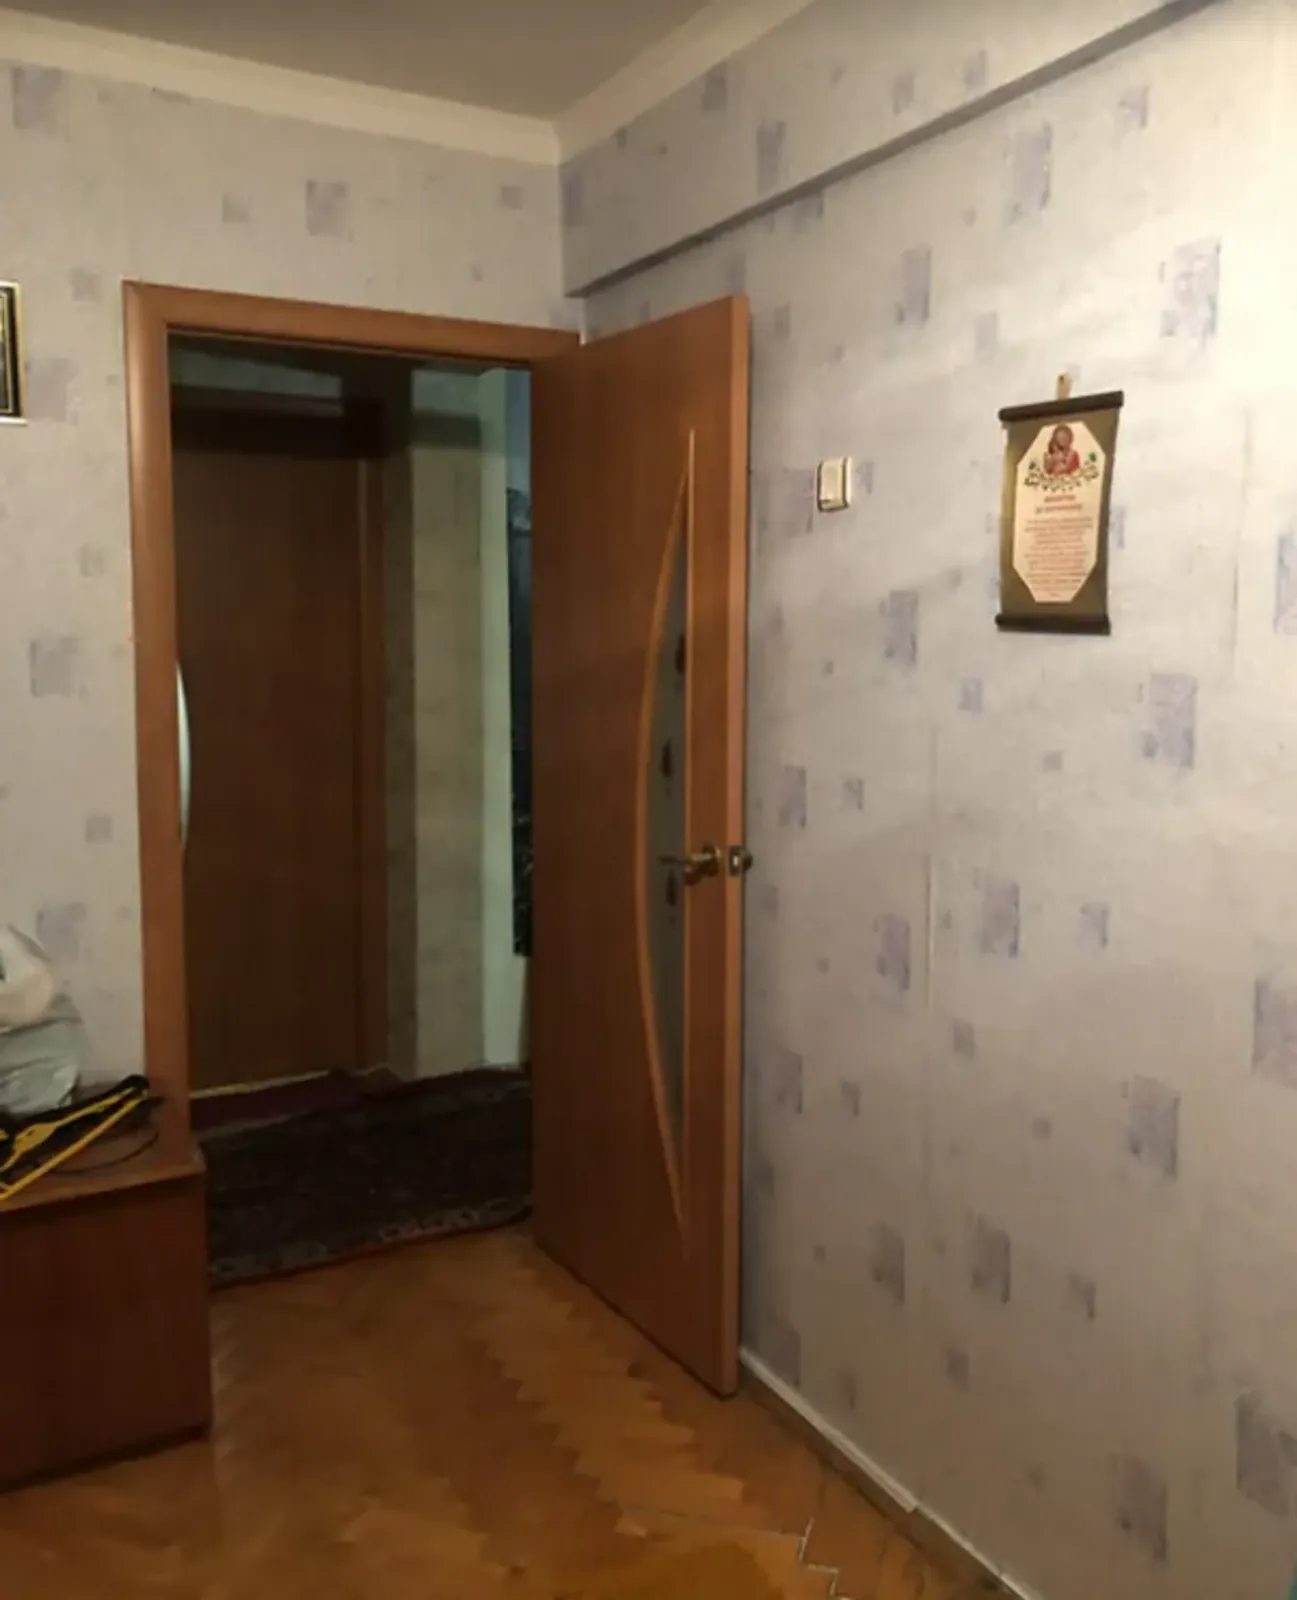 Apartments for sale. 3 rooms, 59 m², 5th floor/5 floors. Bam, Ternopil. 